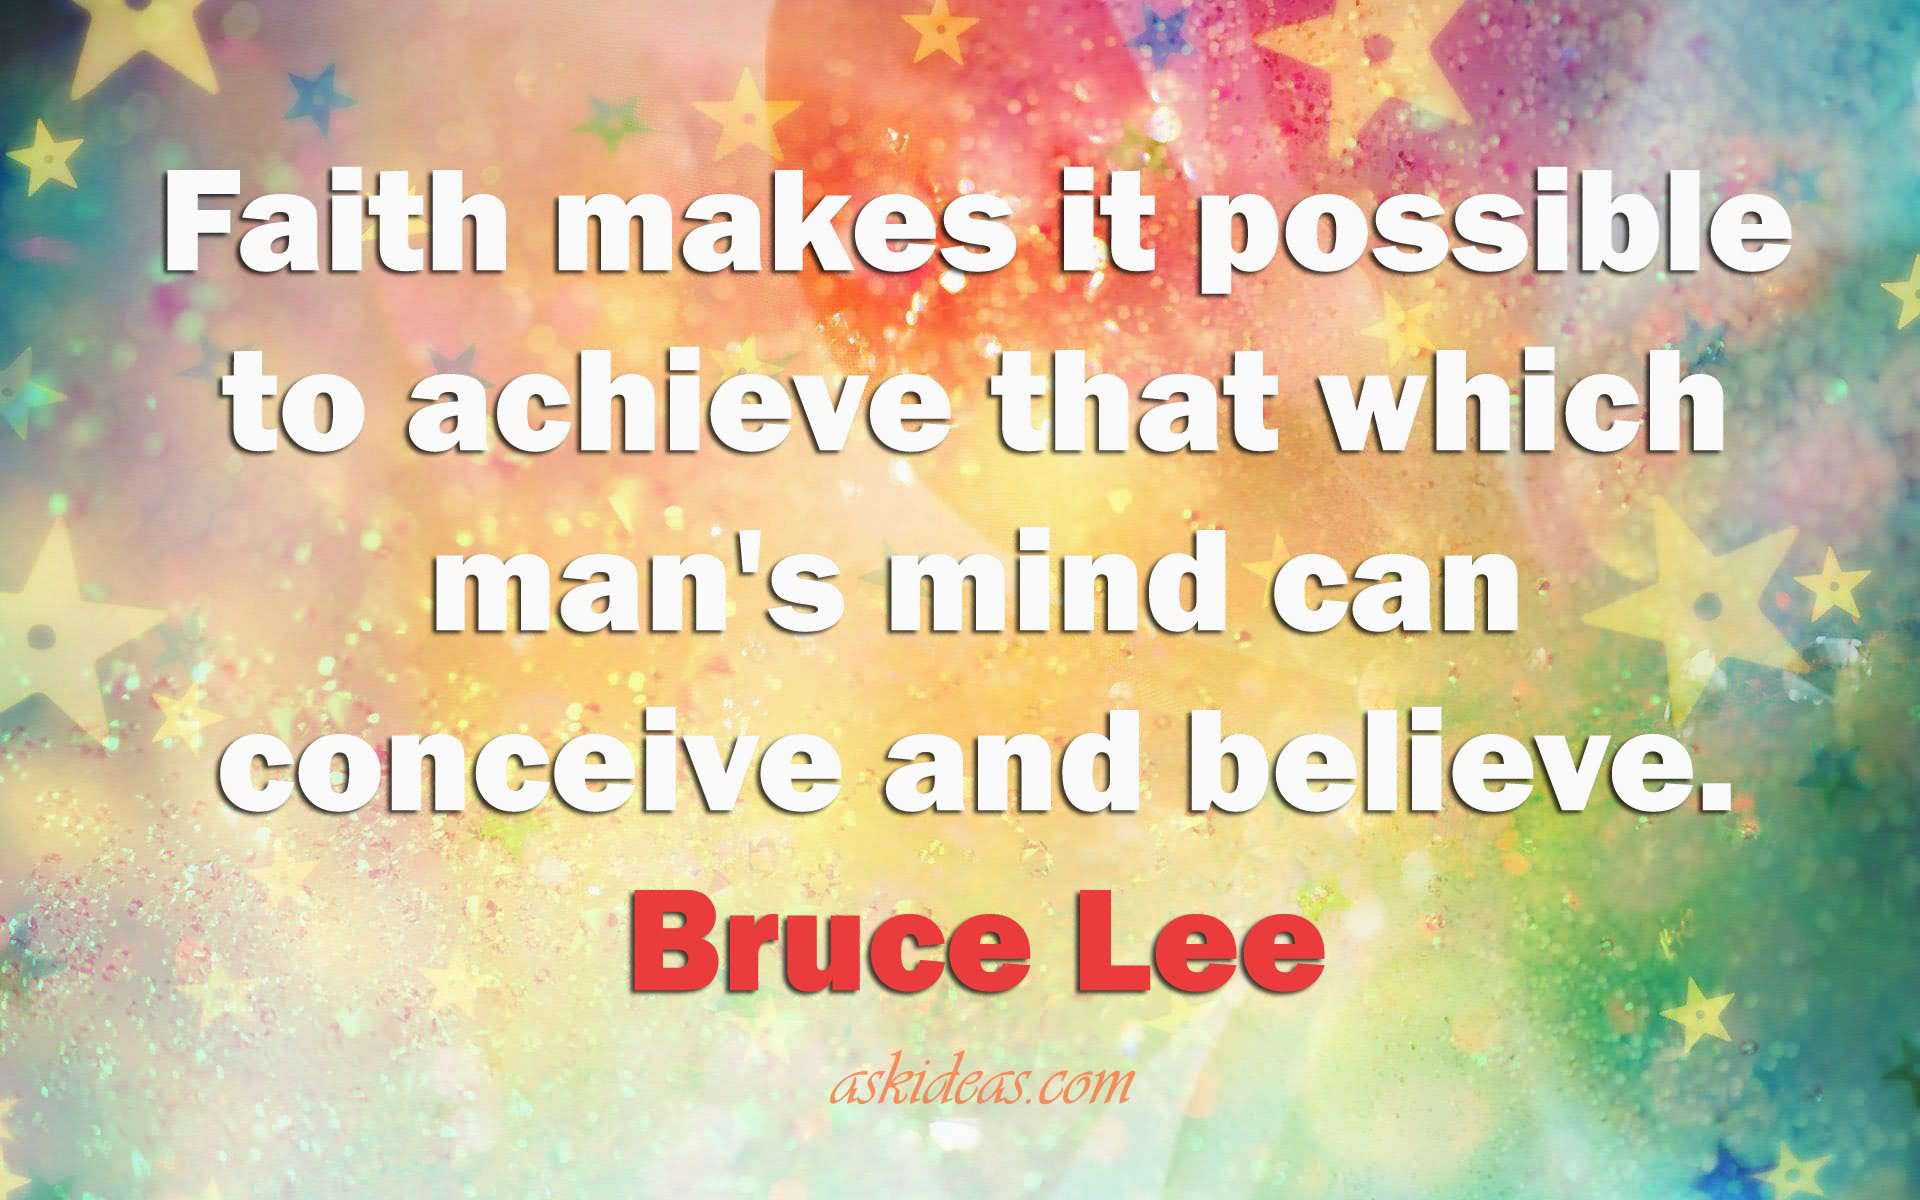 Faith makes it possible to achieve that which man’s mind can conceive and believe.